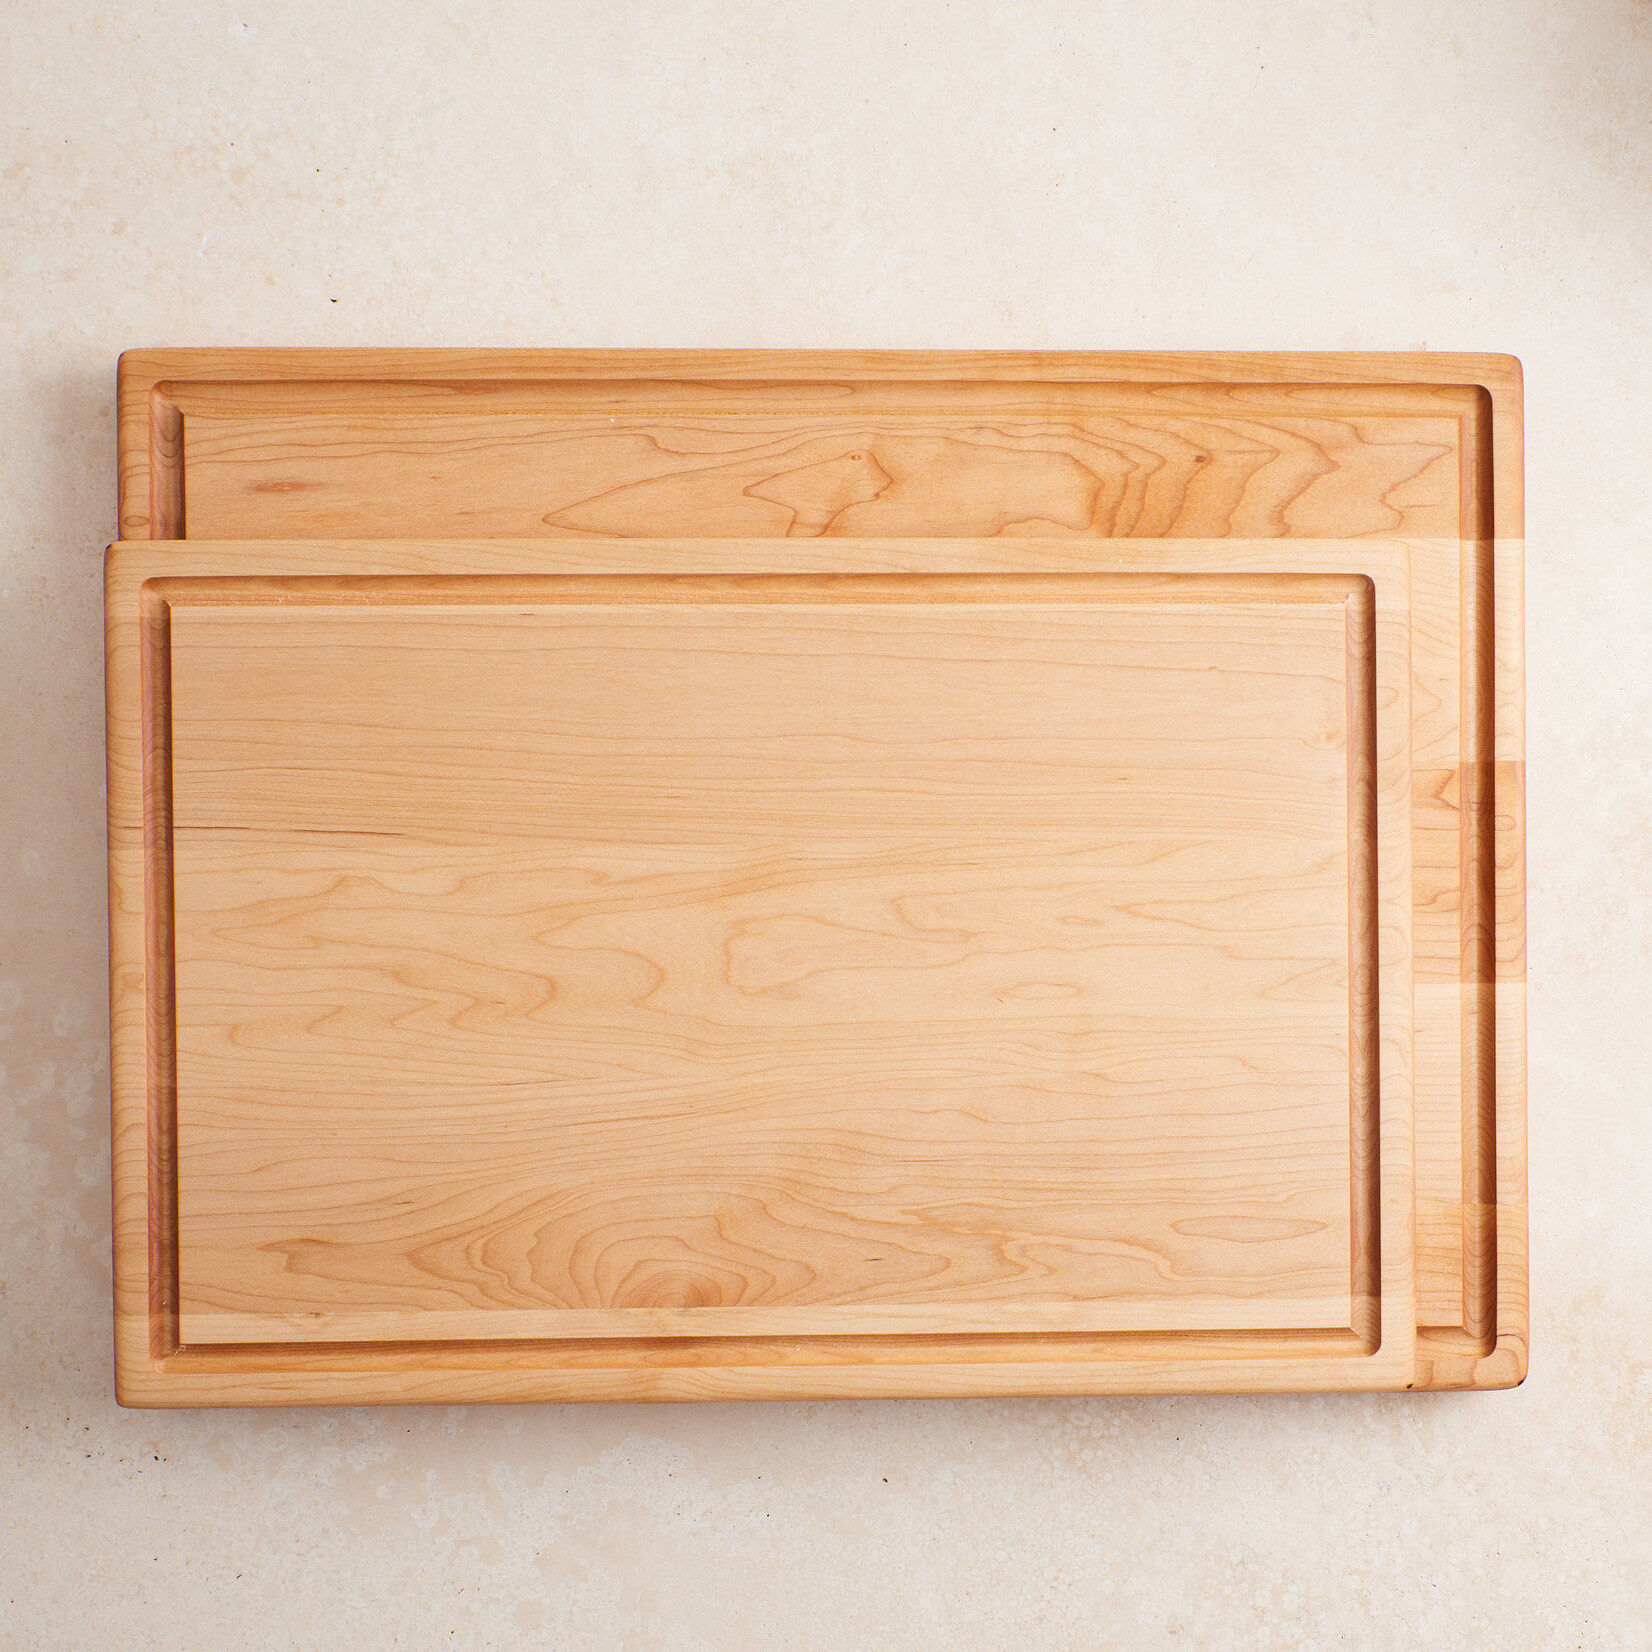 Maple Cutting Board with groove